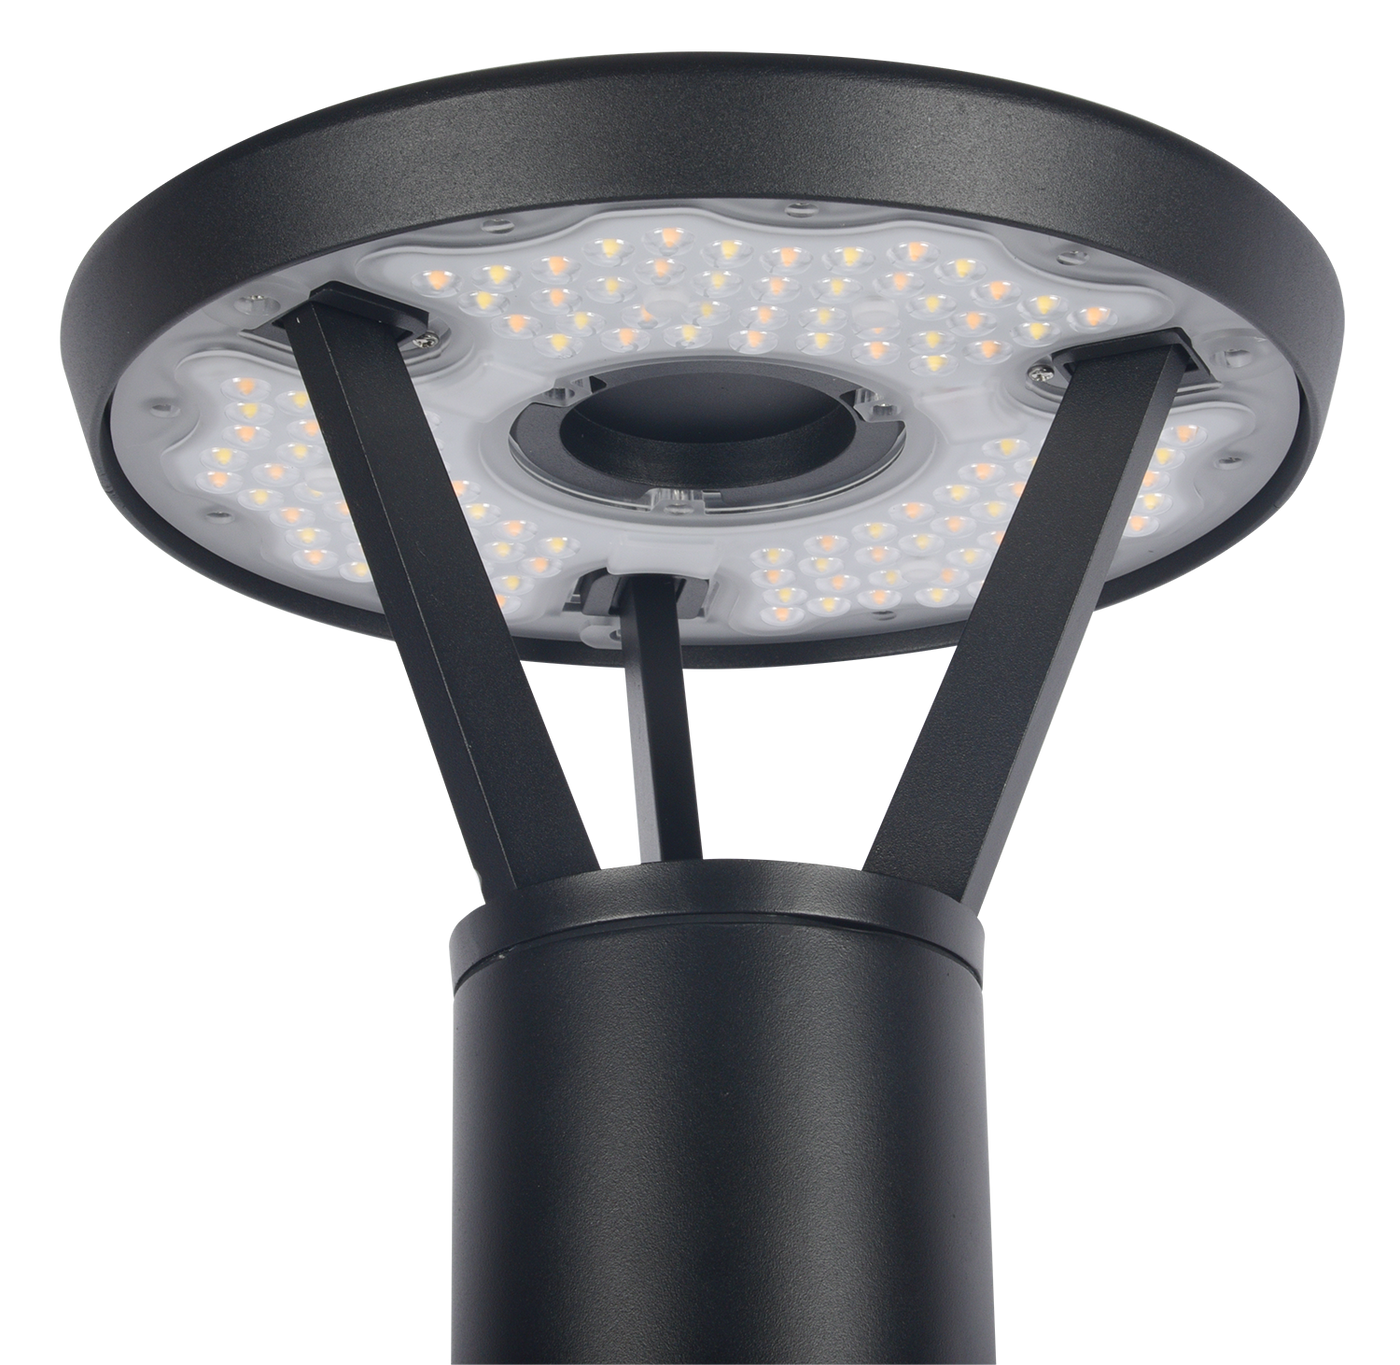 Pathway Light with Built-in Photocell, 2,160 Lumens, 10W/15W/18W Selectable, 120-347V, CCT Selectable 3000K/4000K/5000K, Black or Bronze Finish